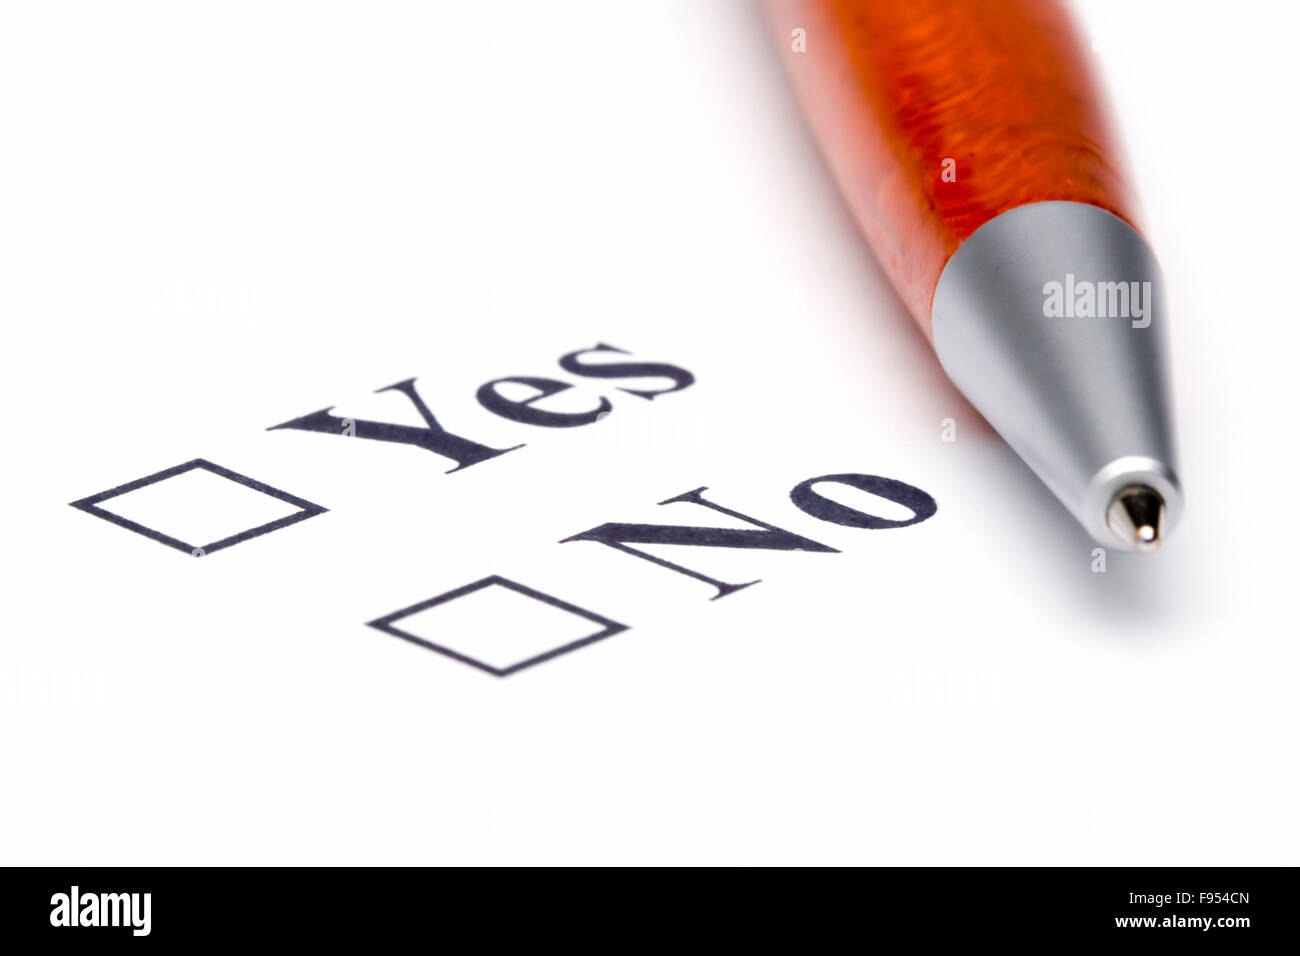 There are two options that a visual survey of the options presented in the yes or no Stock Photo